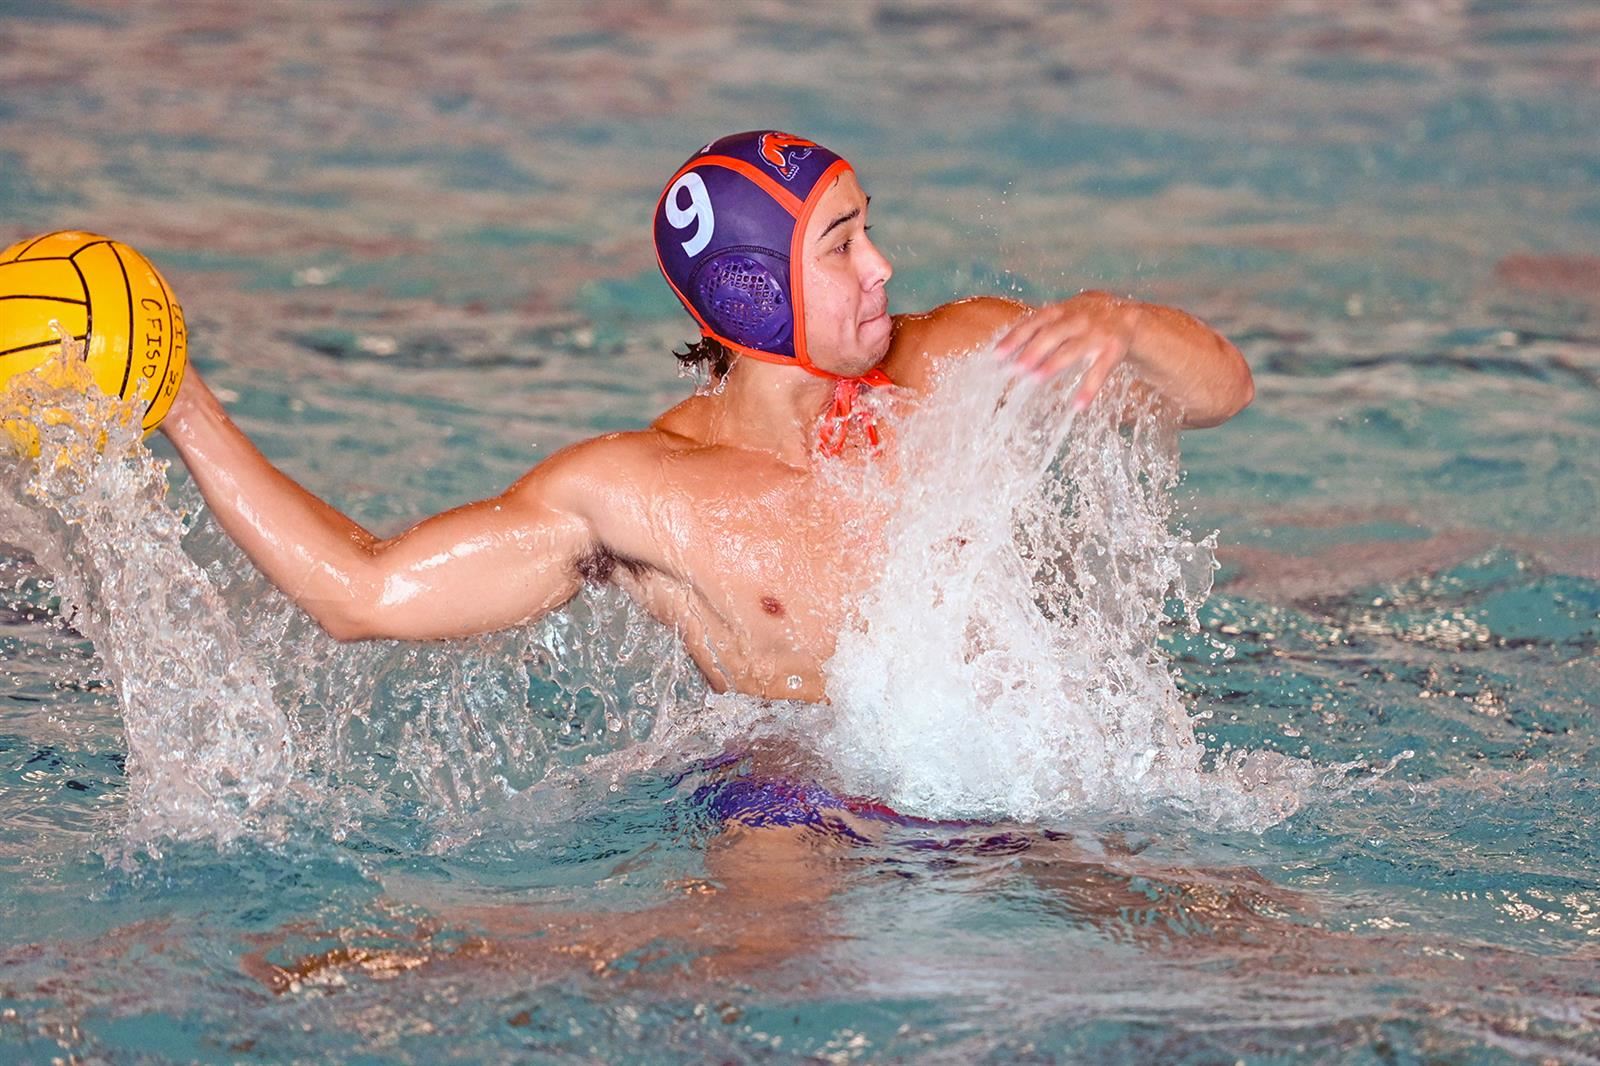 Bridgeland High School junior Aaron Nguyen was voted the District 16-6A boys’ water polo Most Valuable Player.